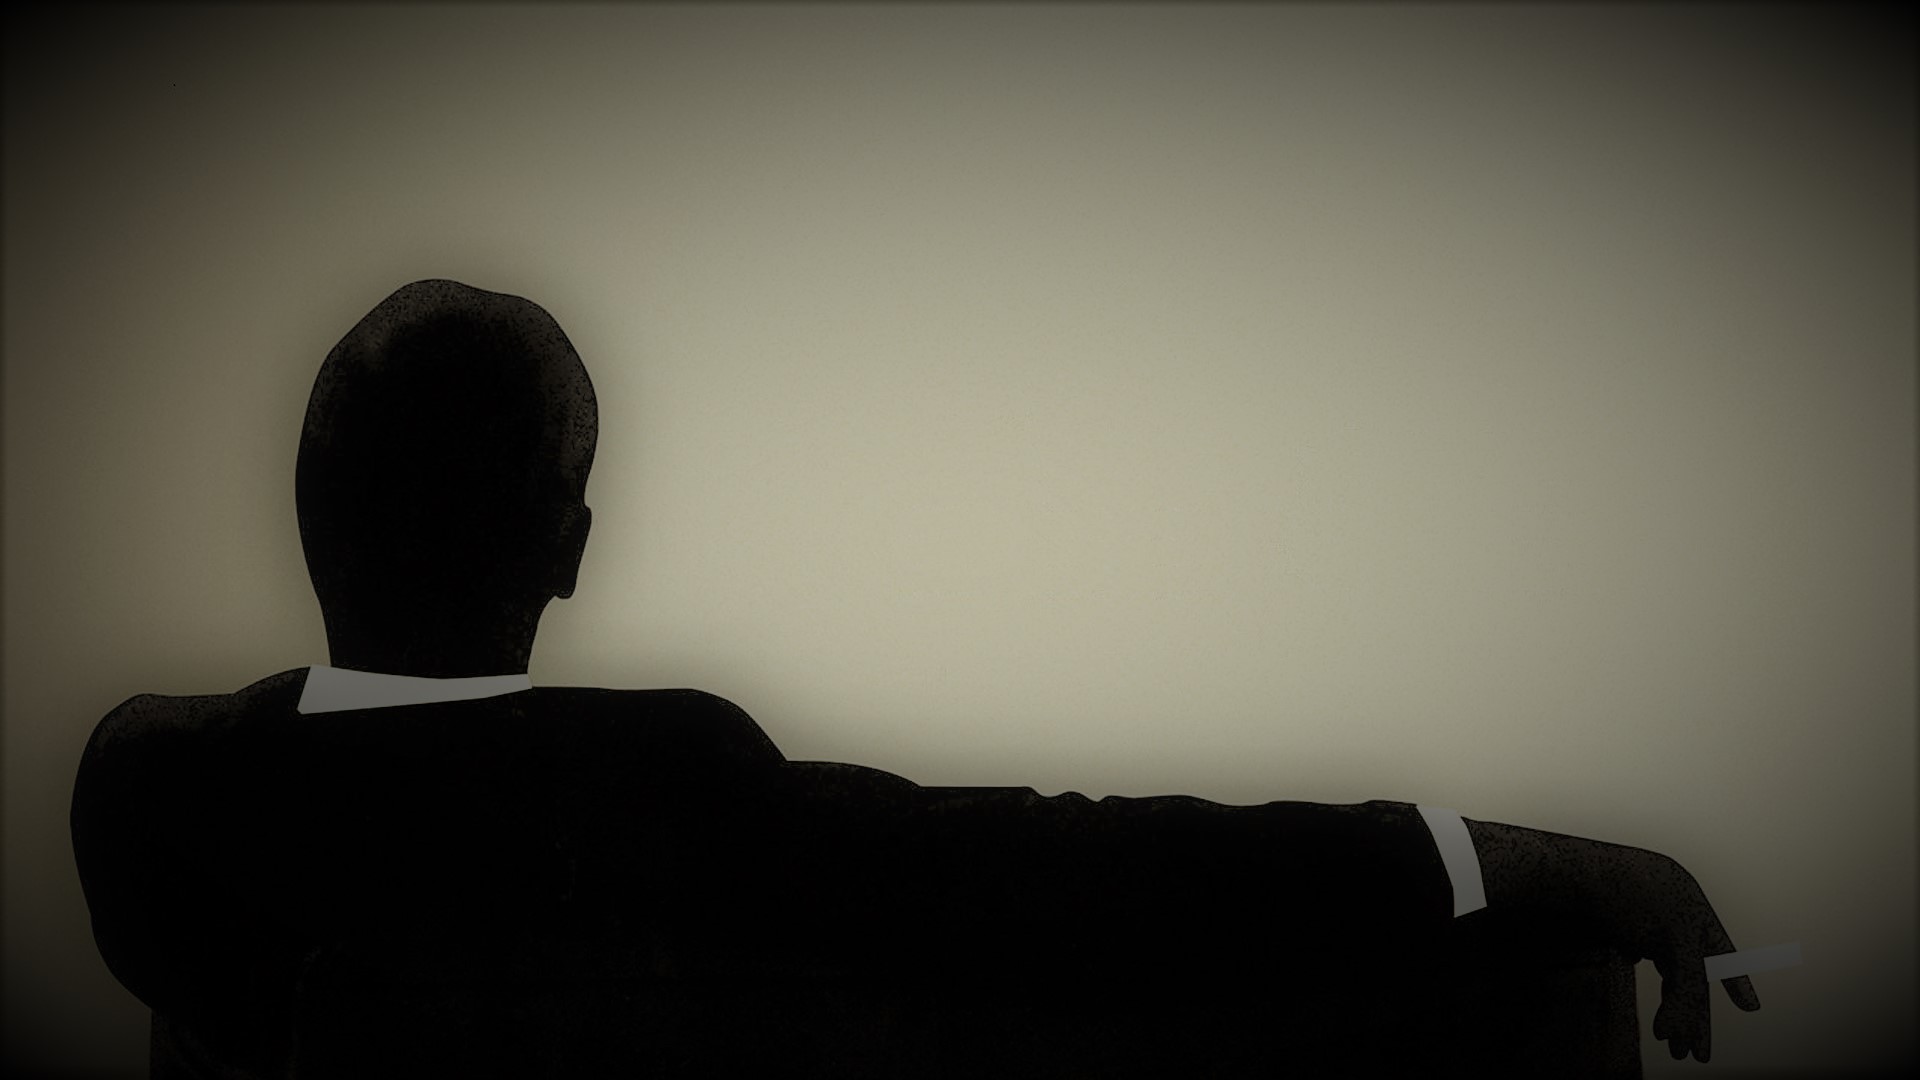 General 1920x1080 Mad Men TV series smoking cigarettes Don Draper silhouette relaxing minimalism simple background